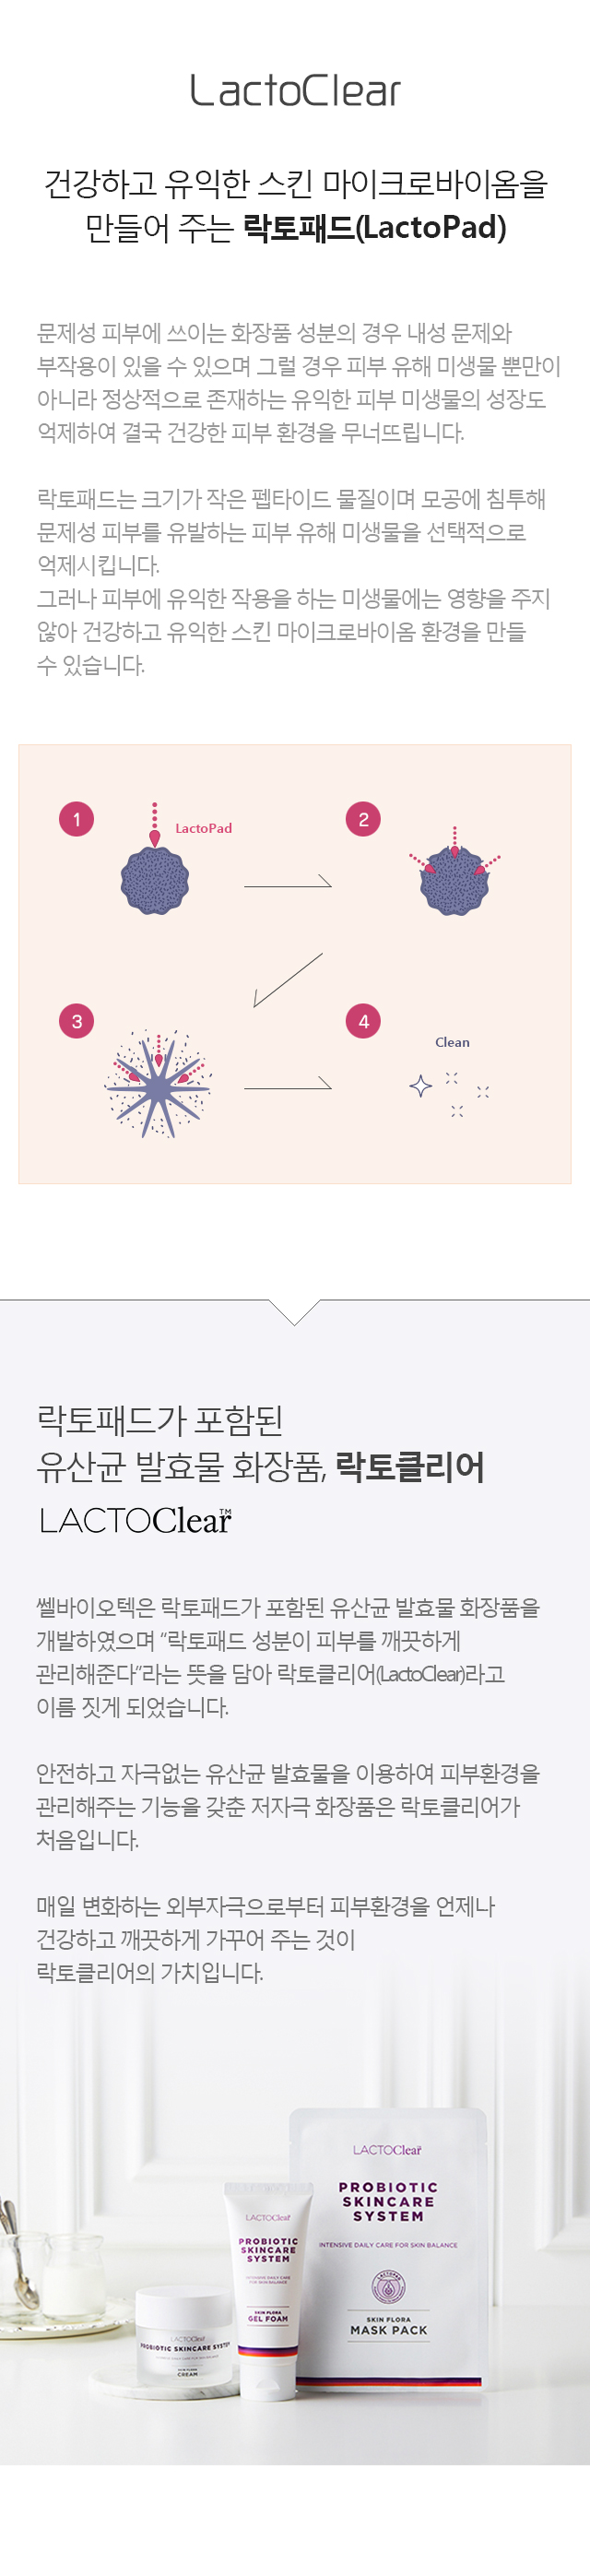 lactoclear